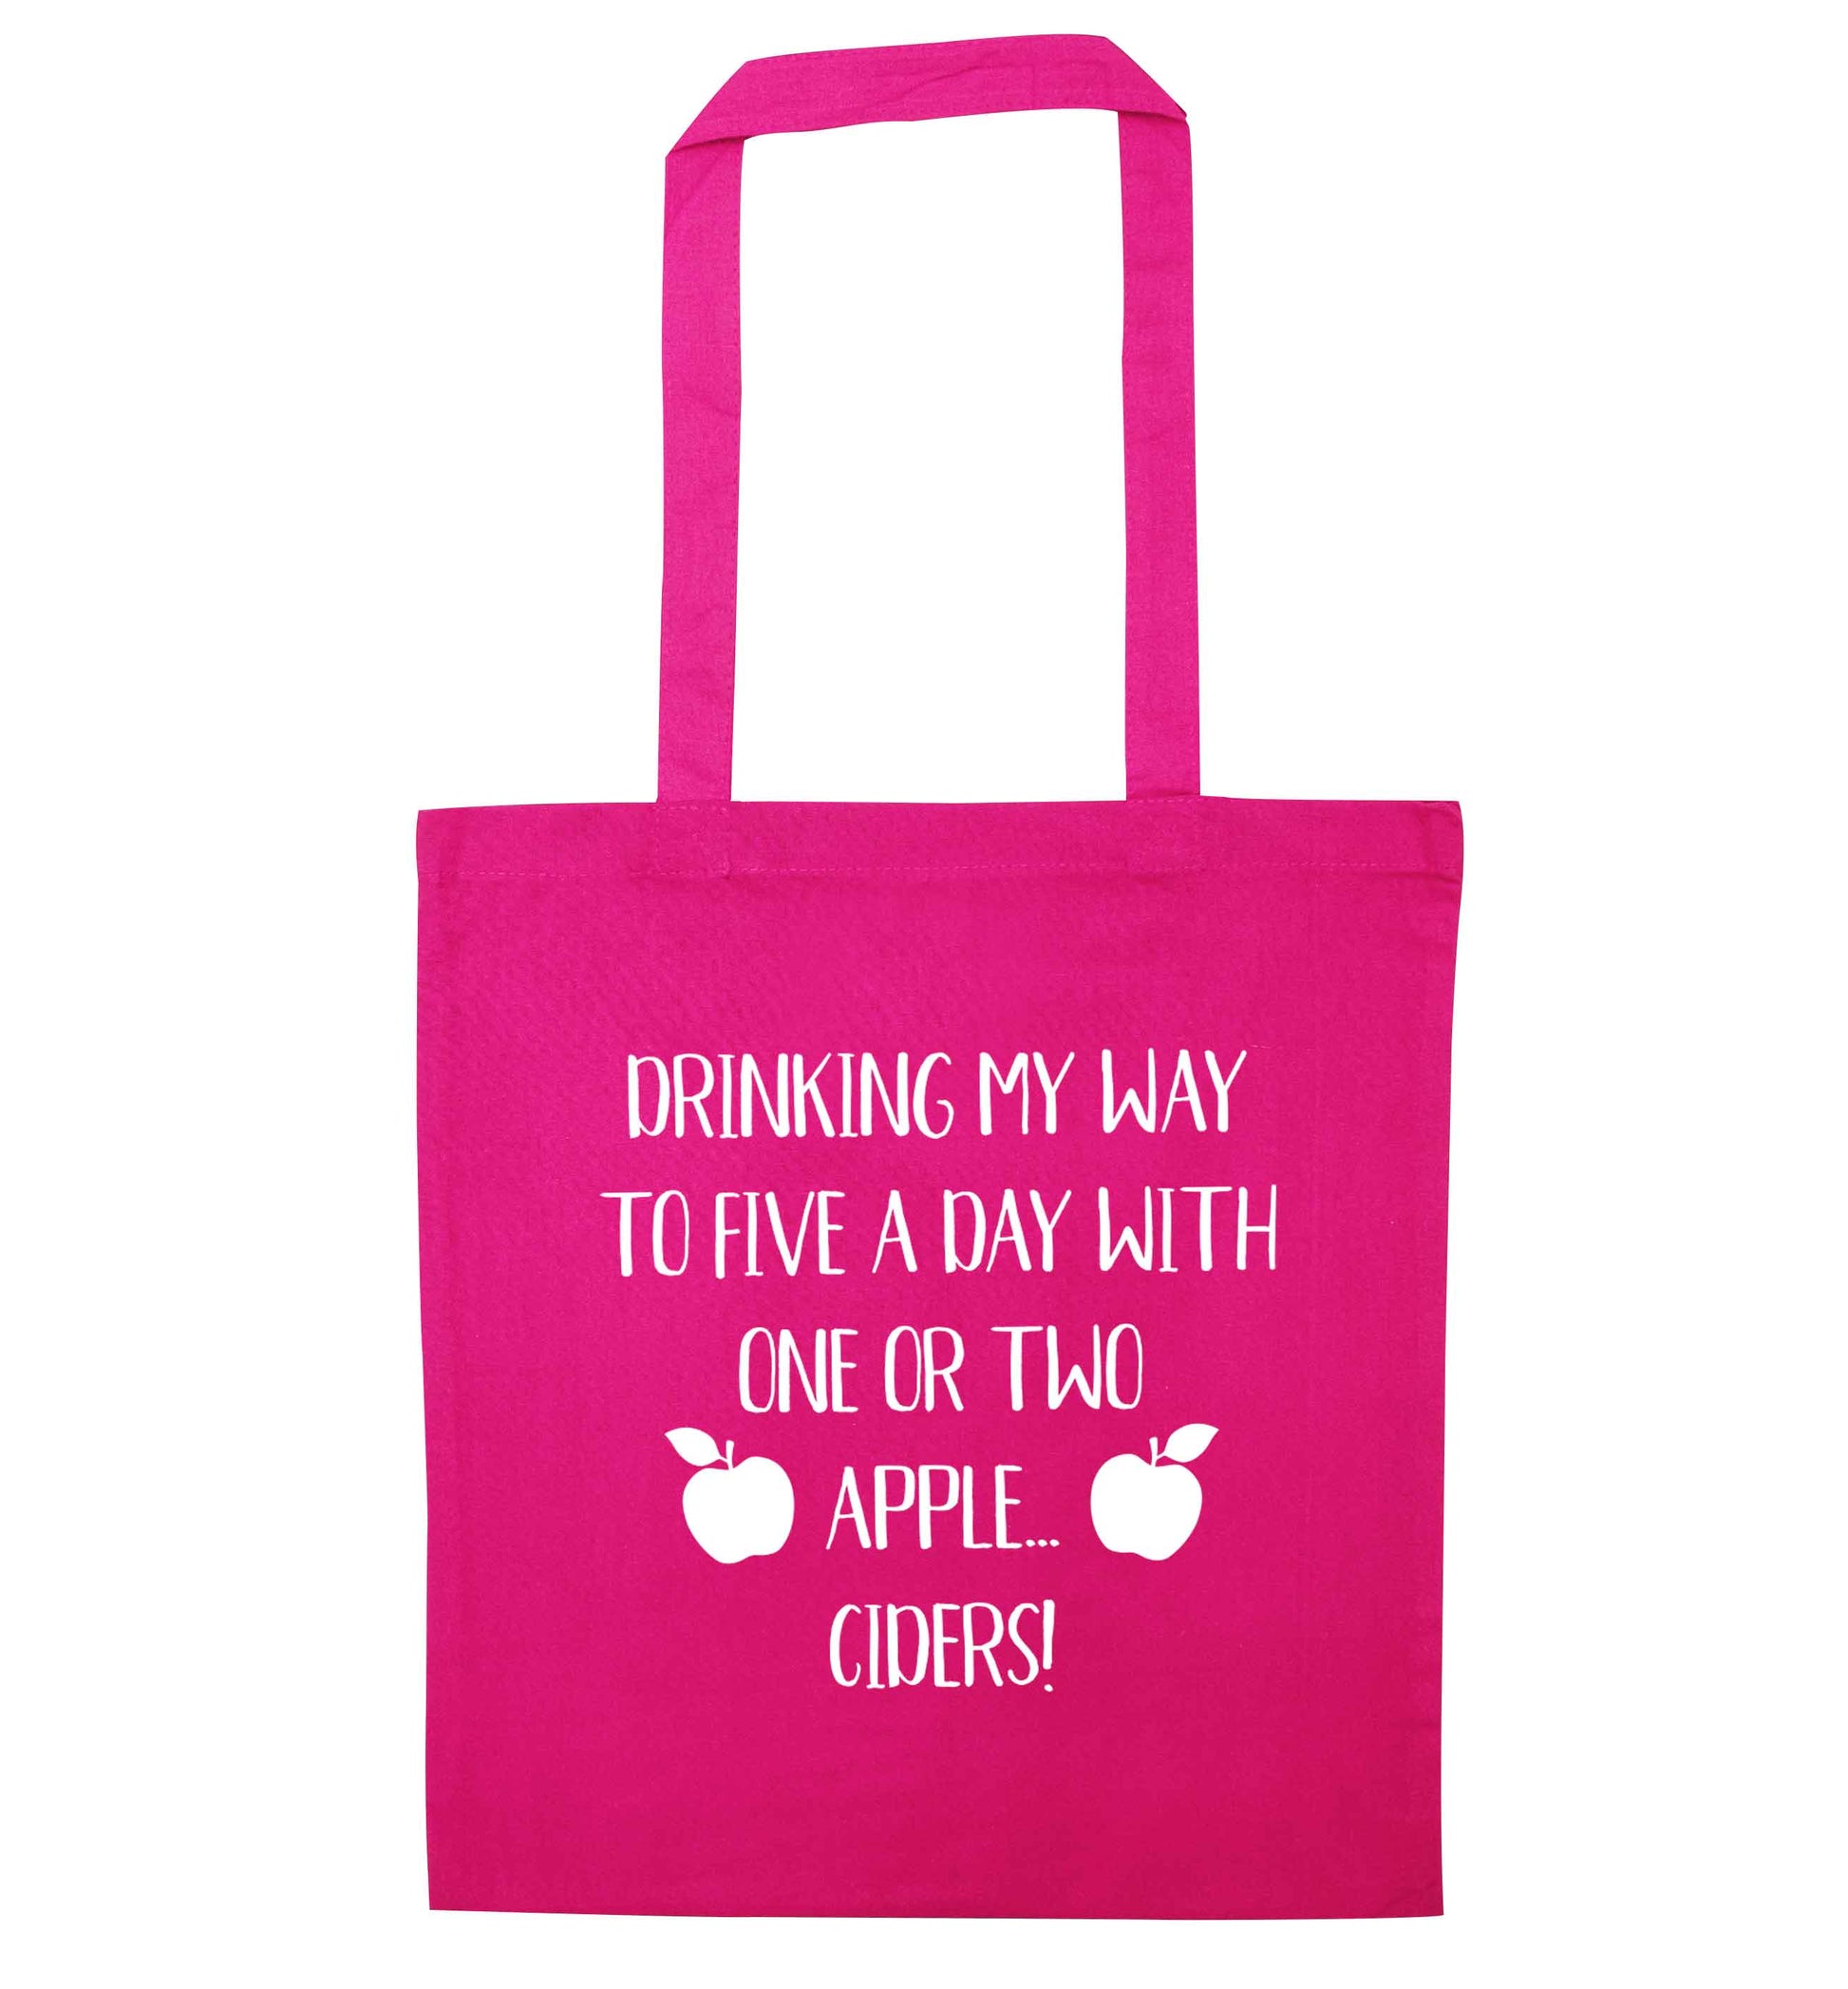 Drinking my way to five a day with one or two apple ciders pink tote bag